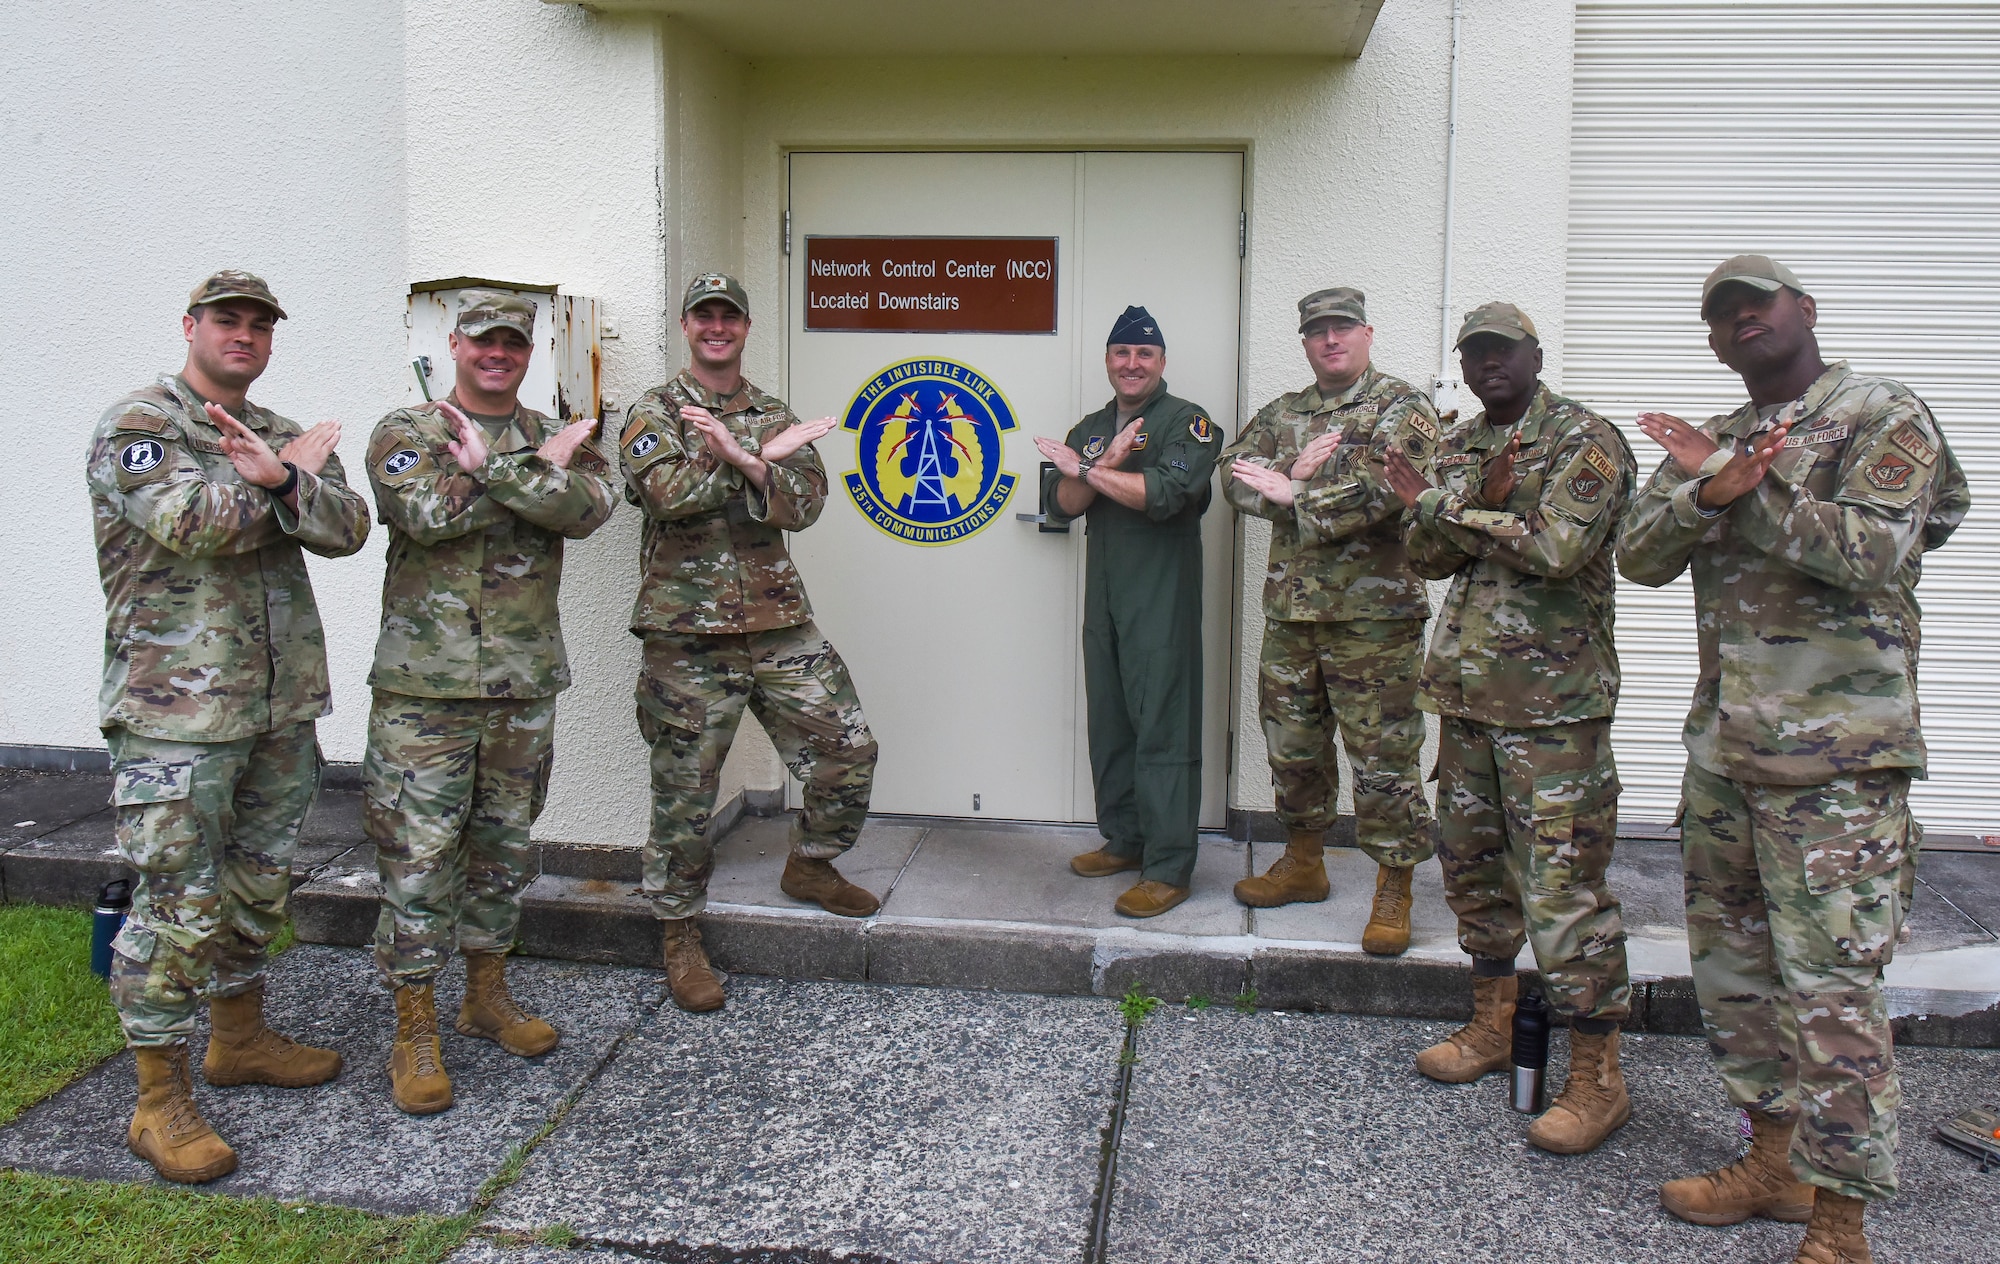 Military members hold up a pose